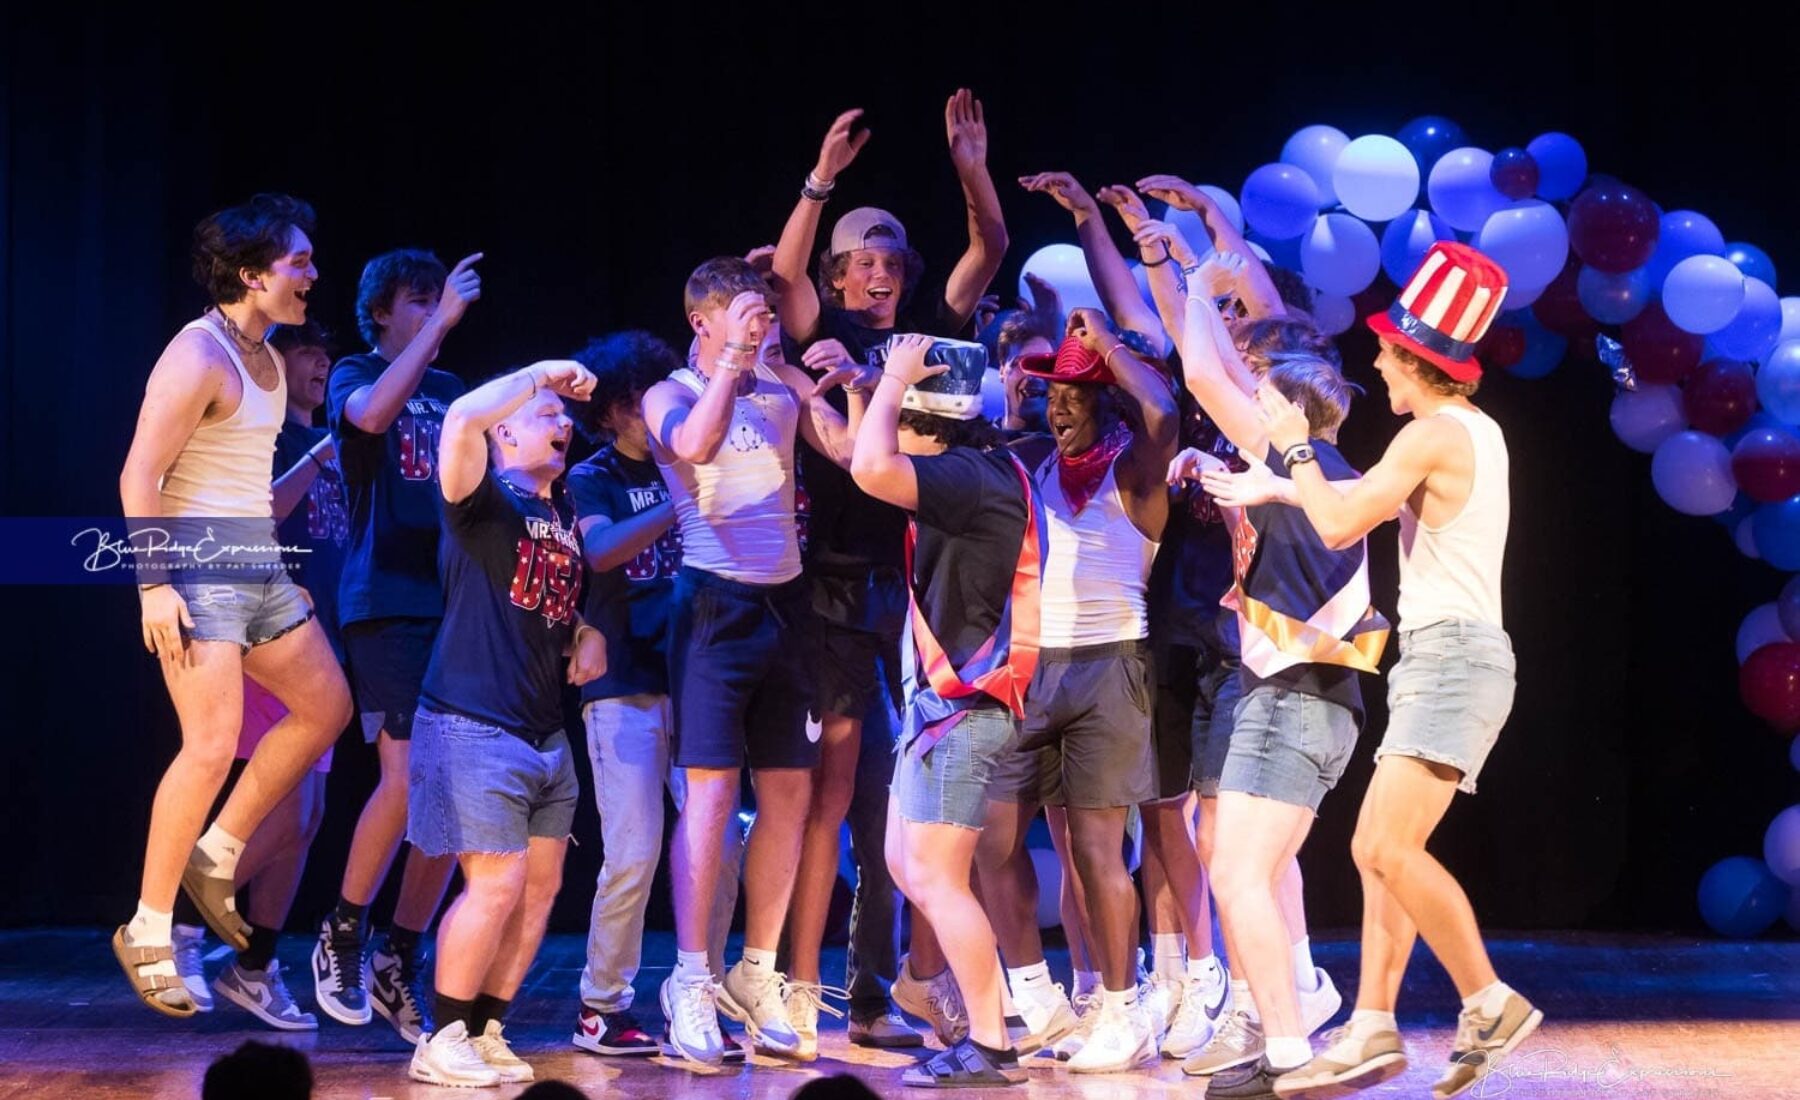 Mr. WHHS- Party in the USA Raises almost $8,000!